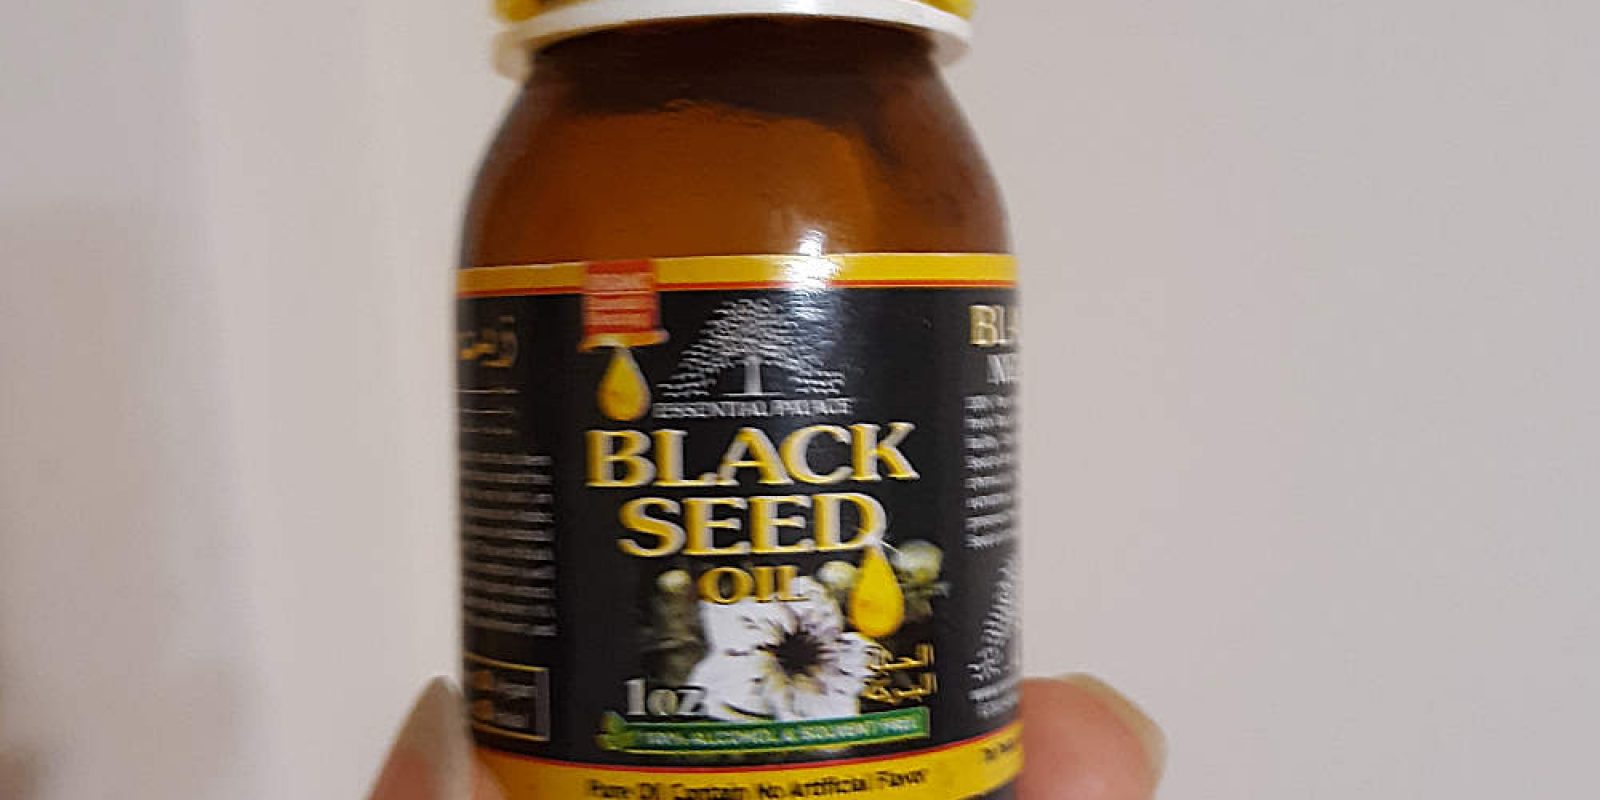 Black Seed oit to grow your hair